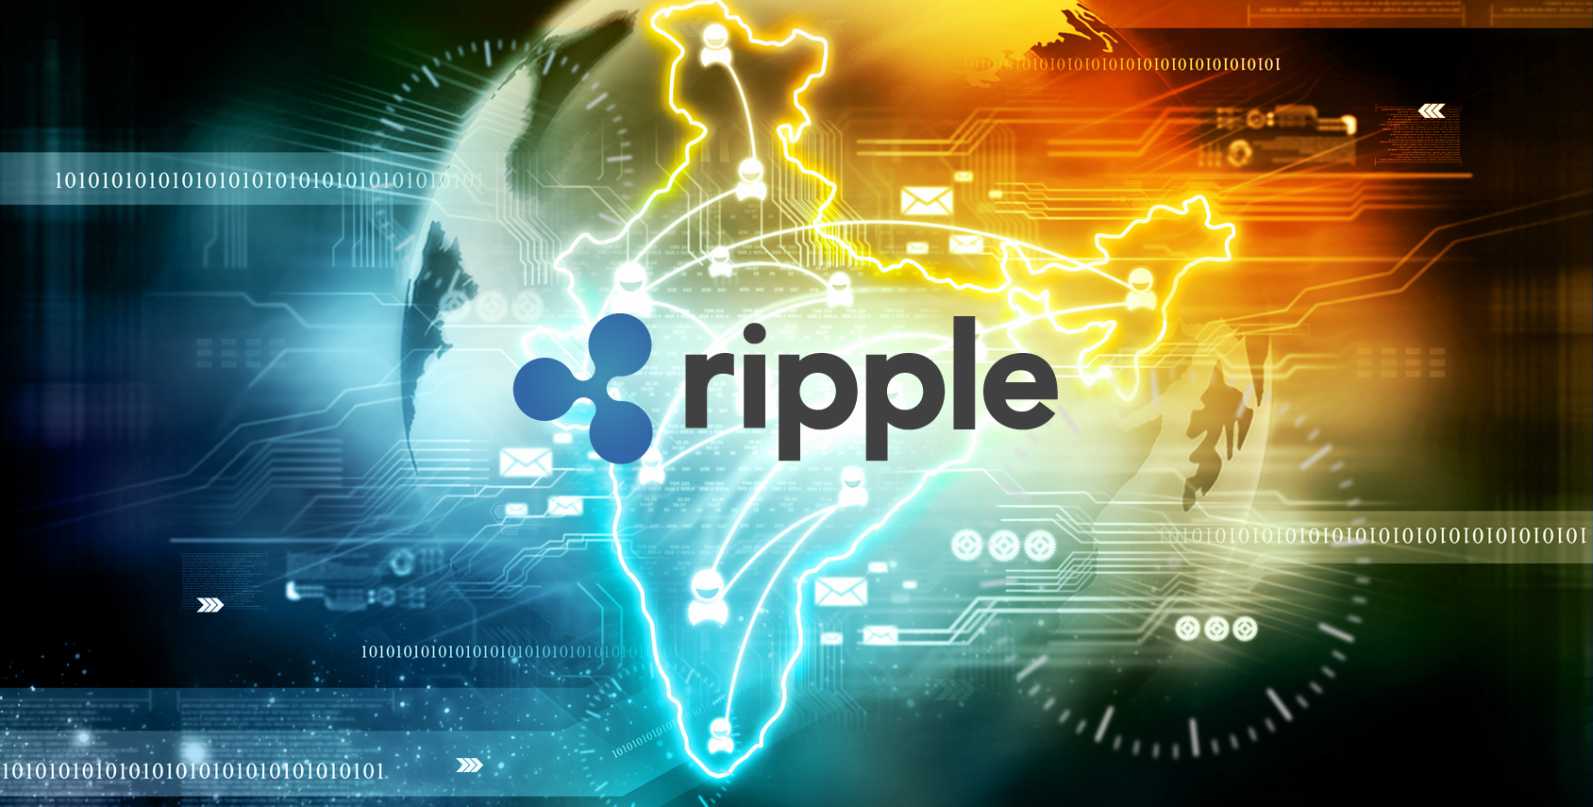 XRP Price Prediction How high can XRP Go Ripple?